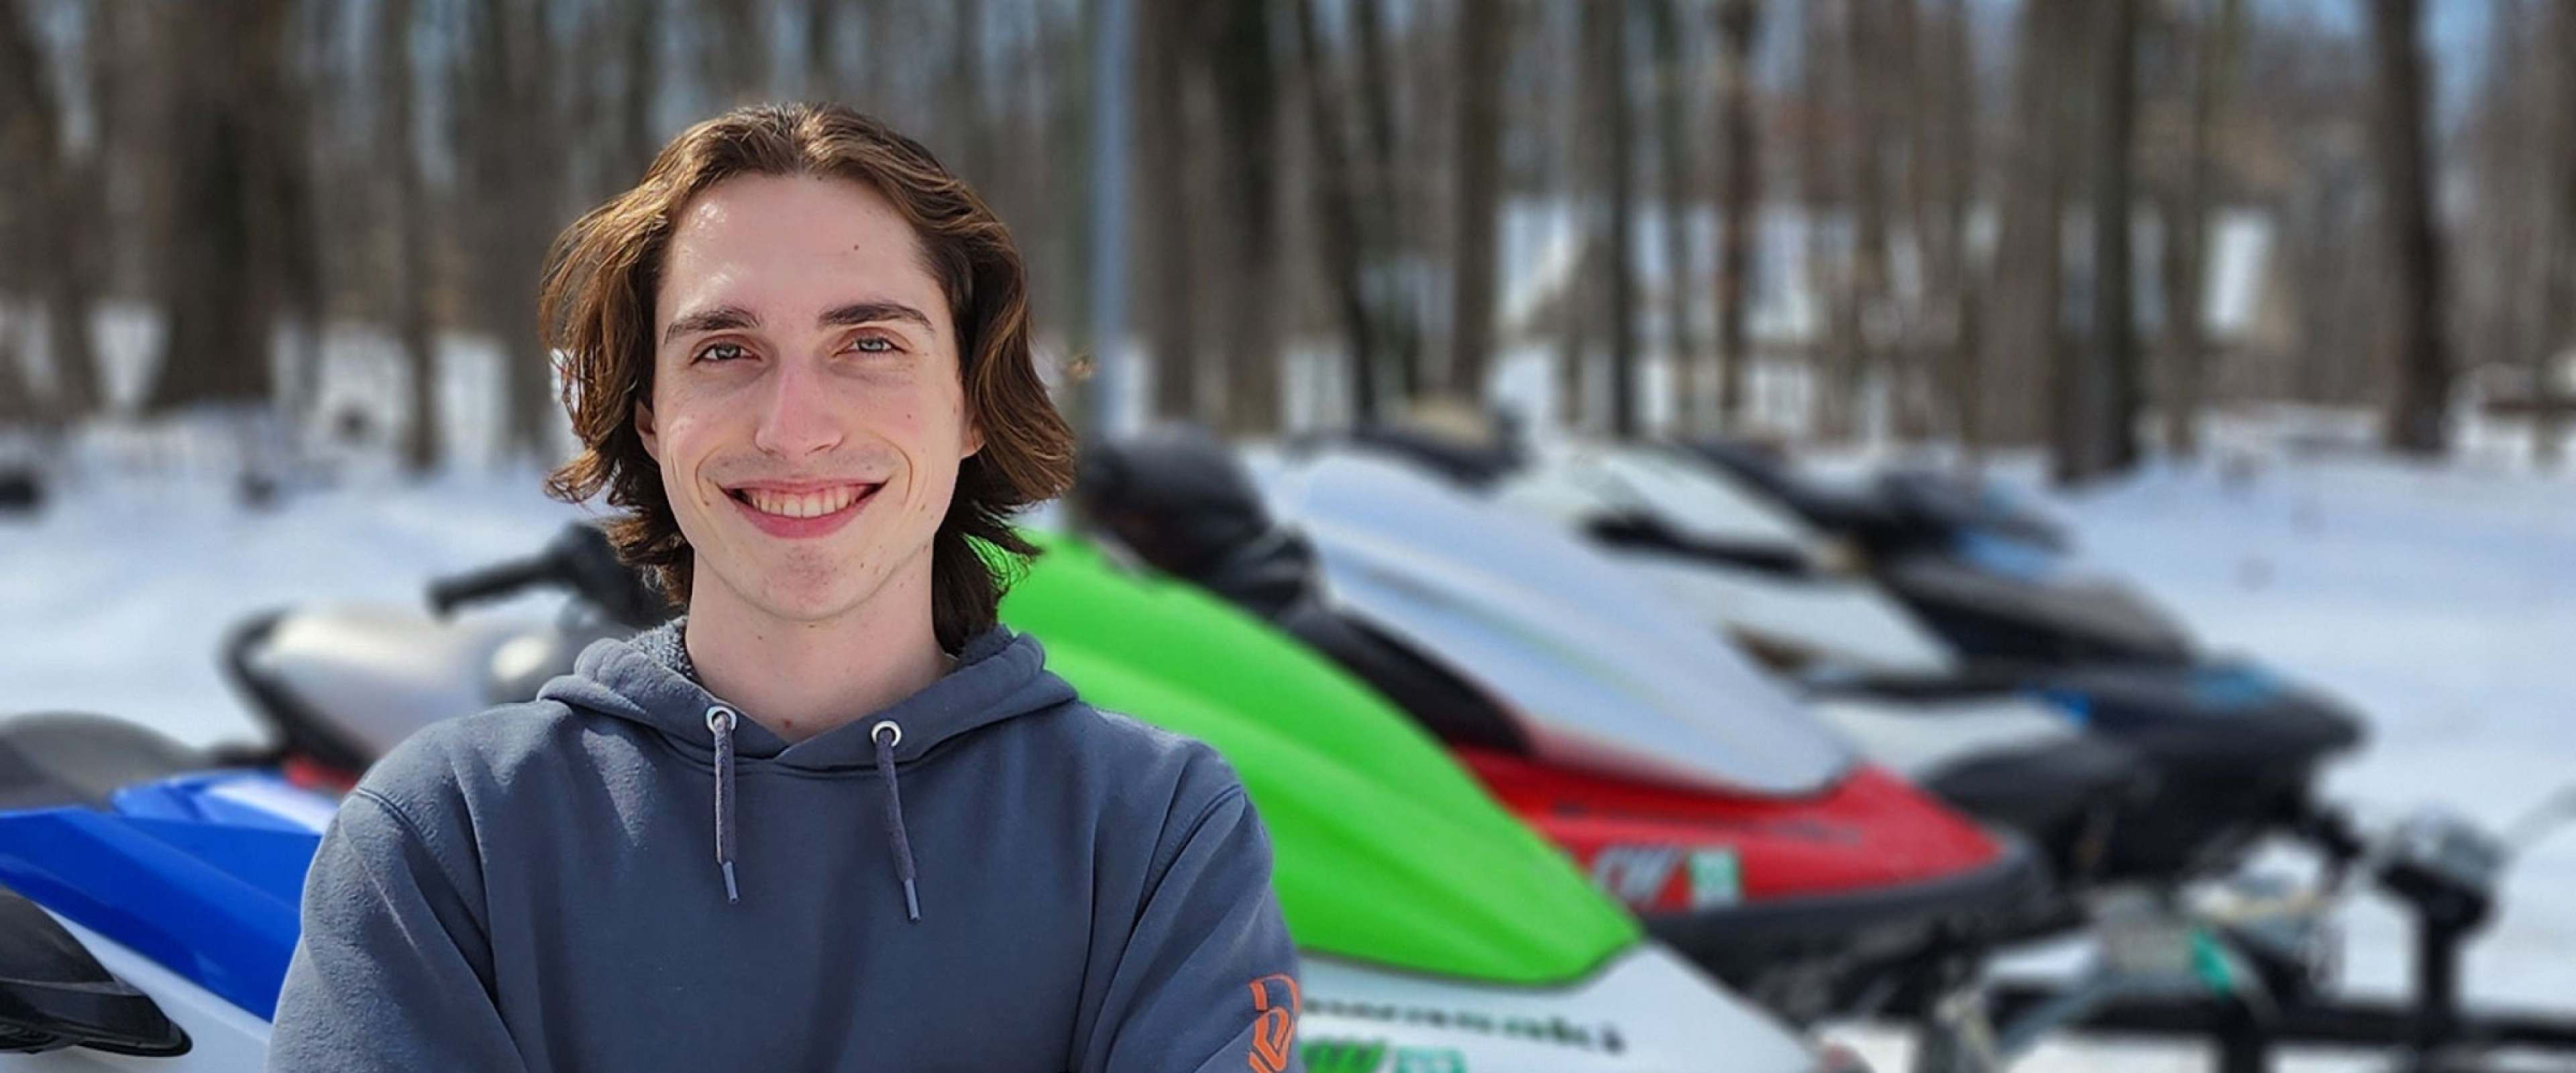 Smiling student with personal watercraft collection